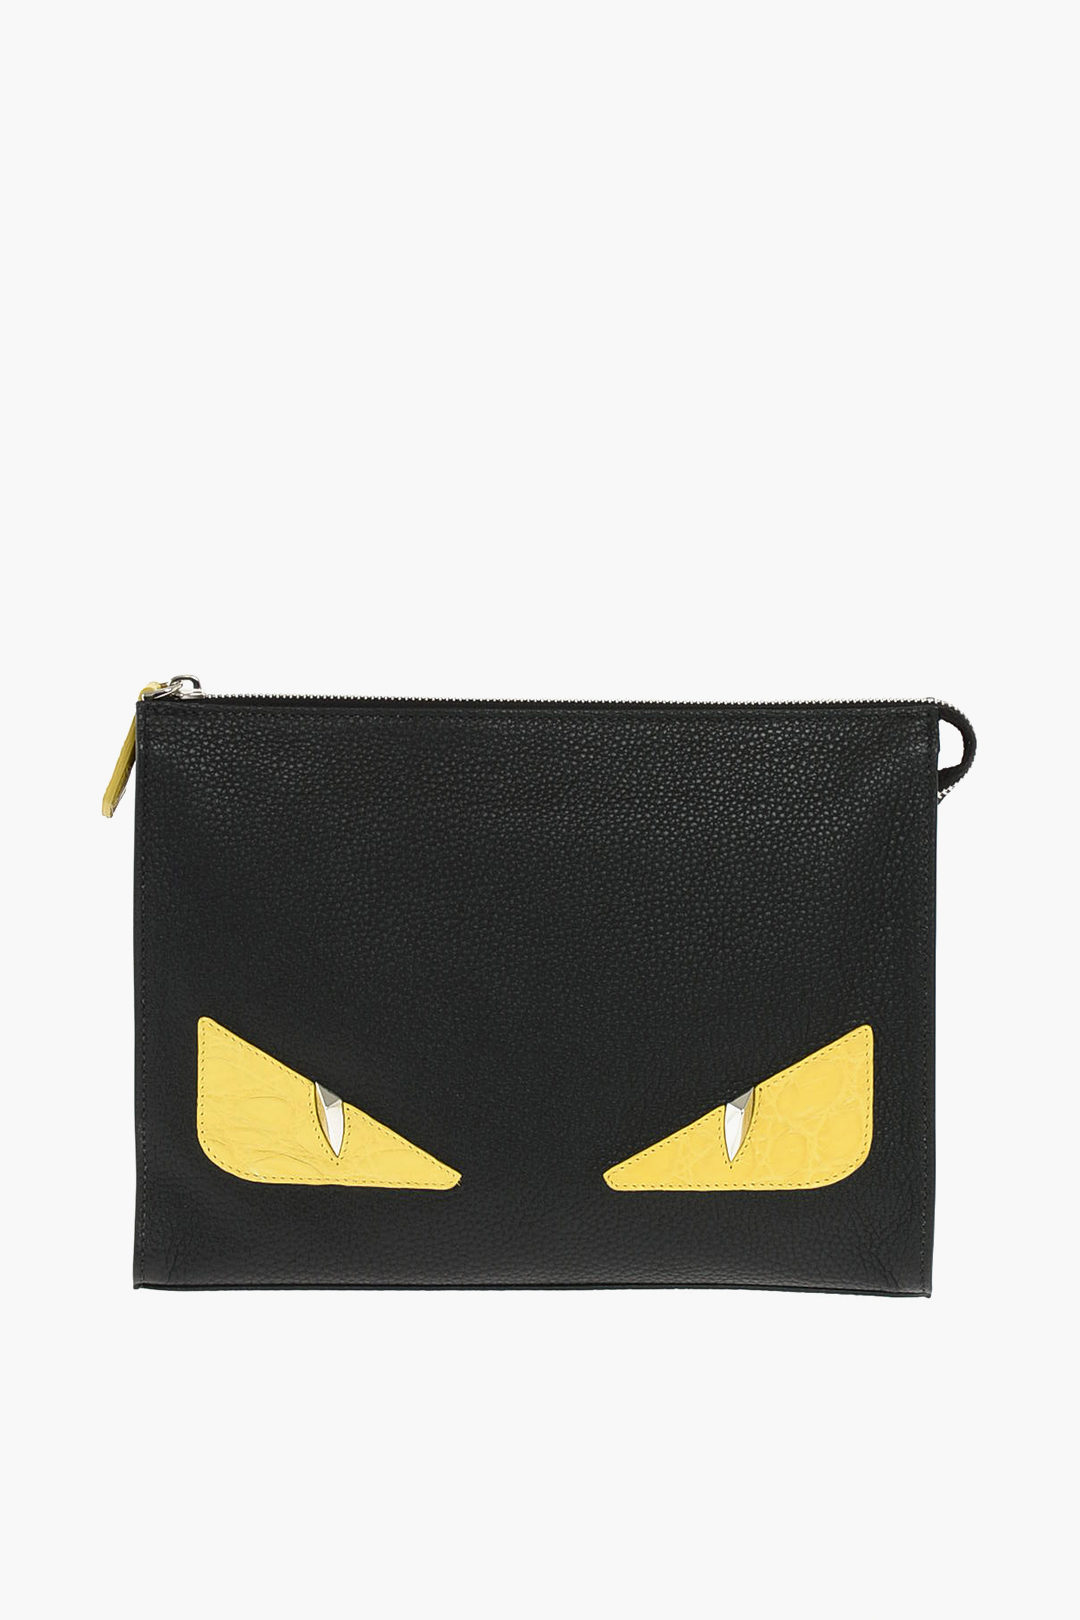 Zipped MONSTER BUGS EYES Leather Clutch